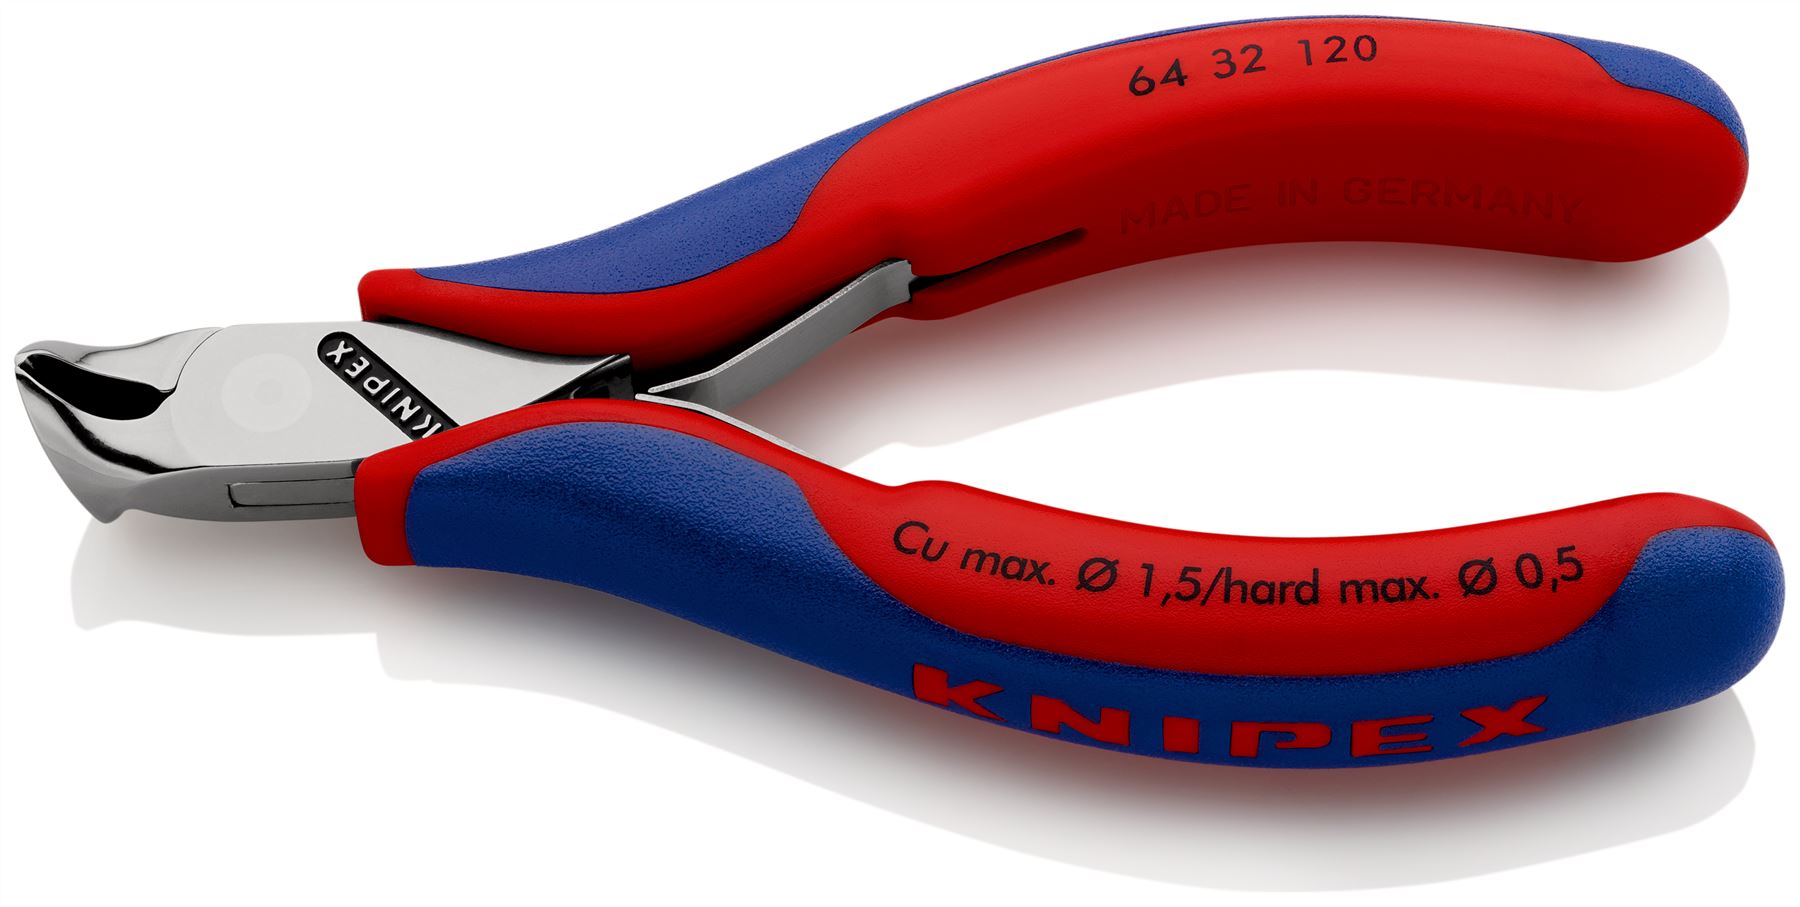 KNIPEX Precision Electronics End Cutting Nipper Pliers 15° Bend 120mm Multi Component Grips 64 32 120